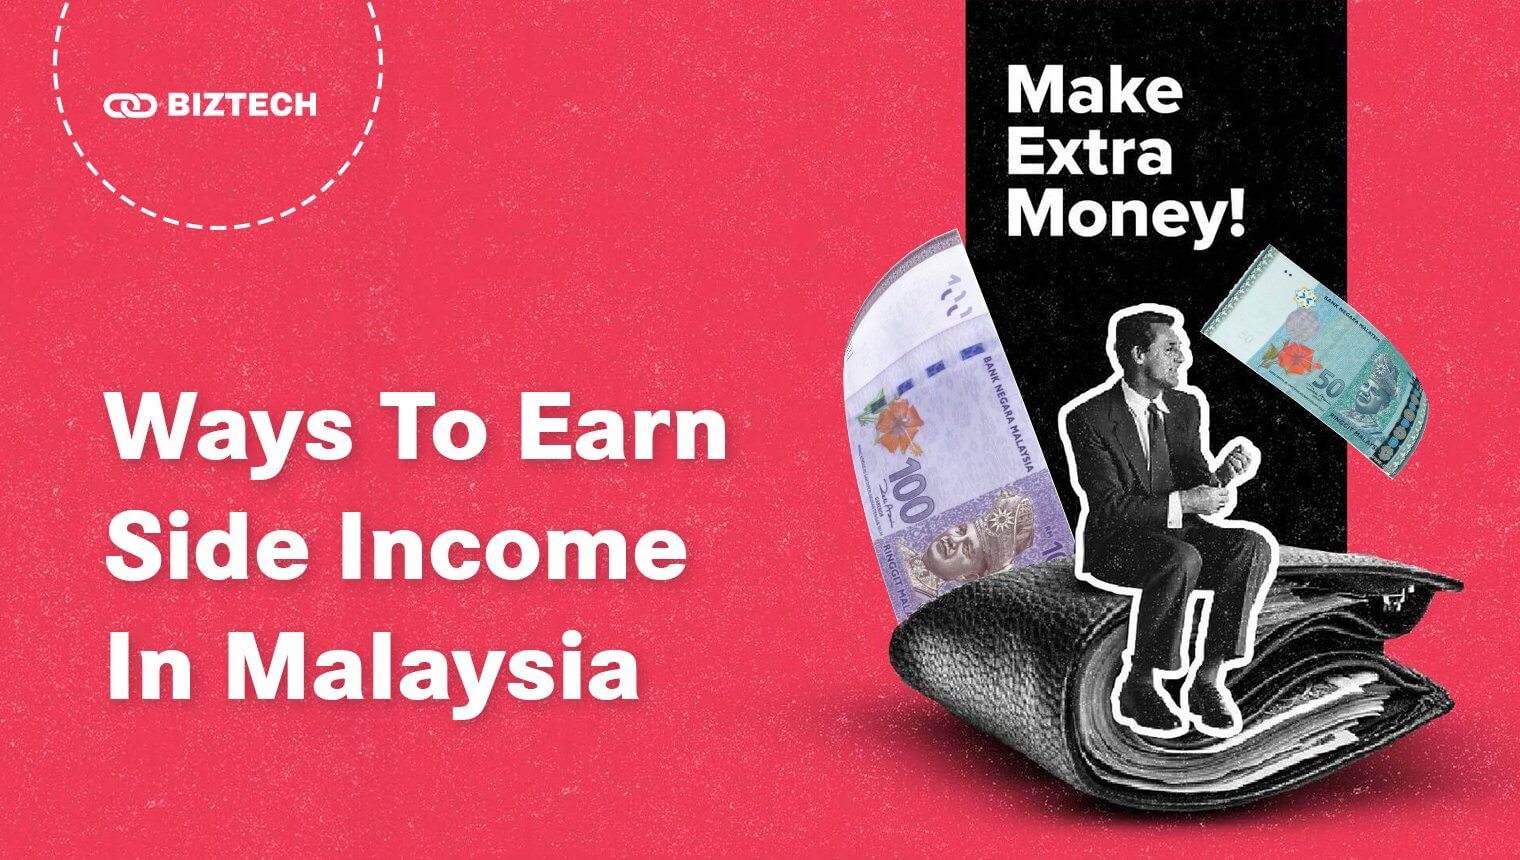 10 Practical Online & Offline Ways to earn a side income in Malaysia